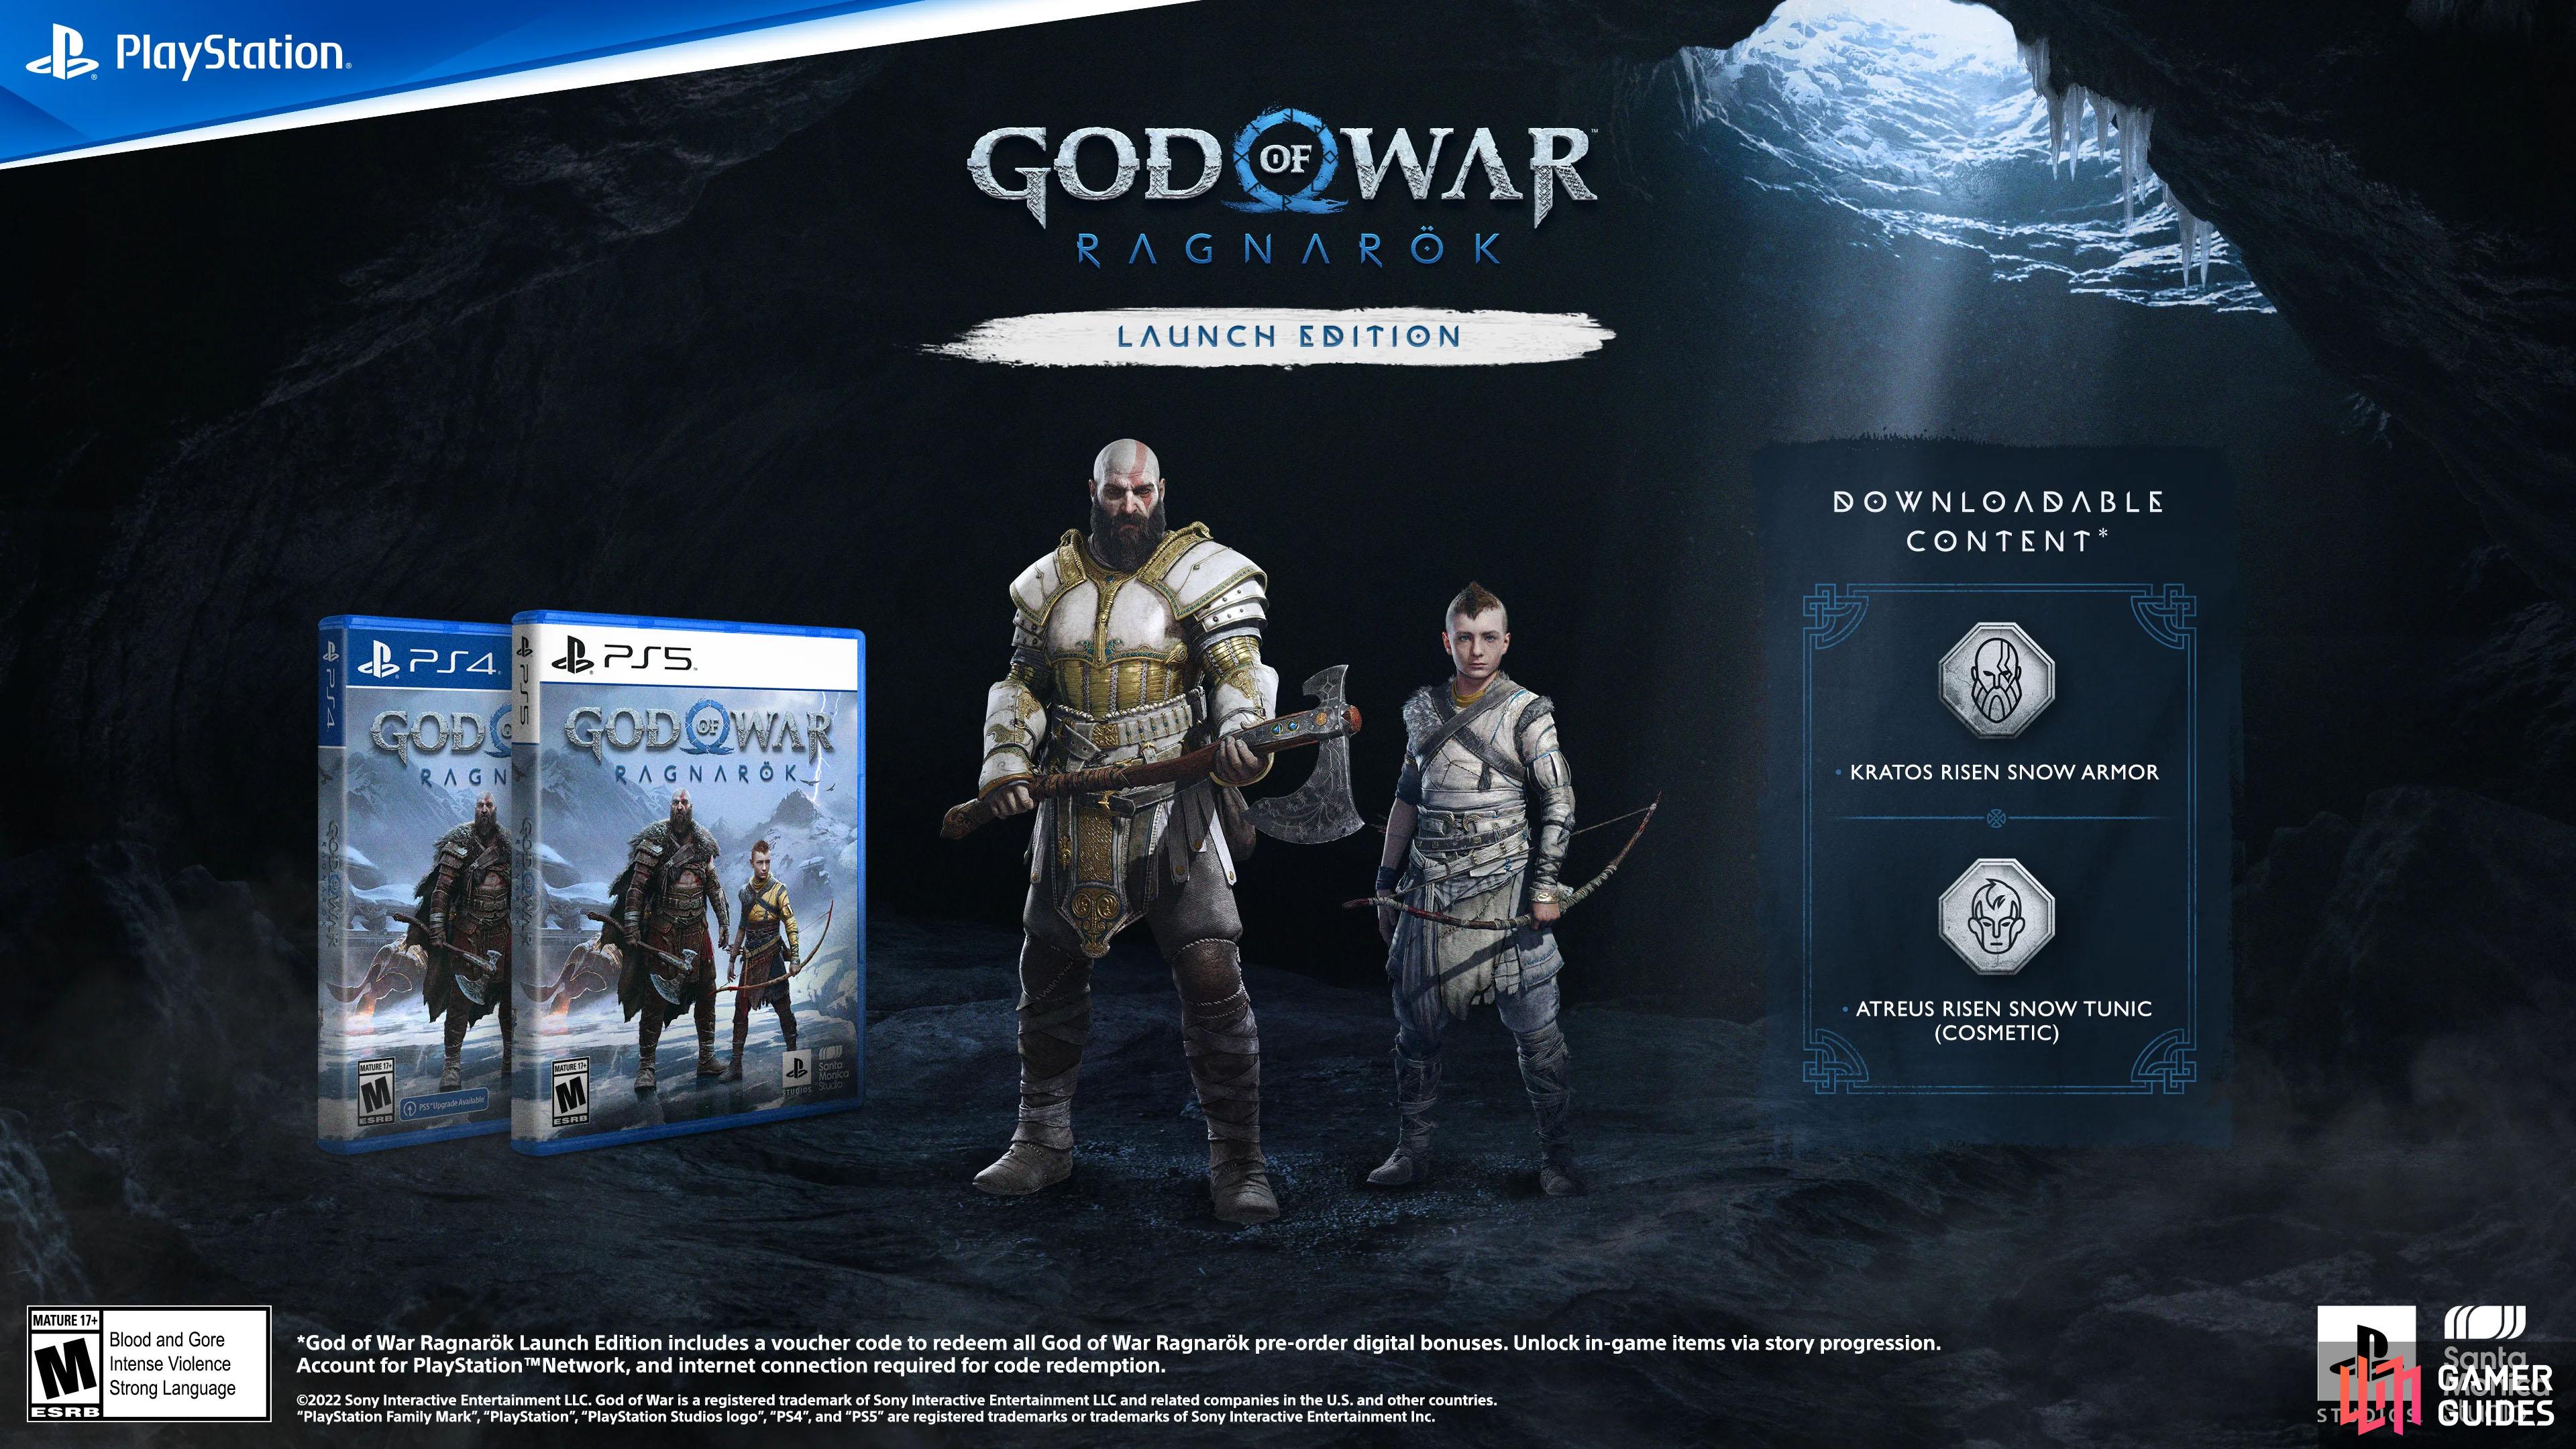 The standard edition includes some preorder bonuses